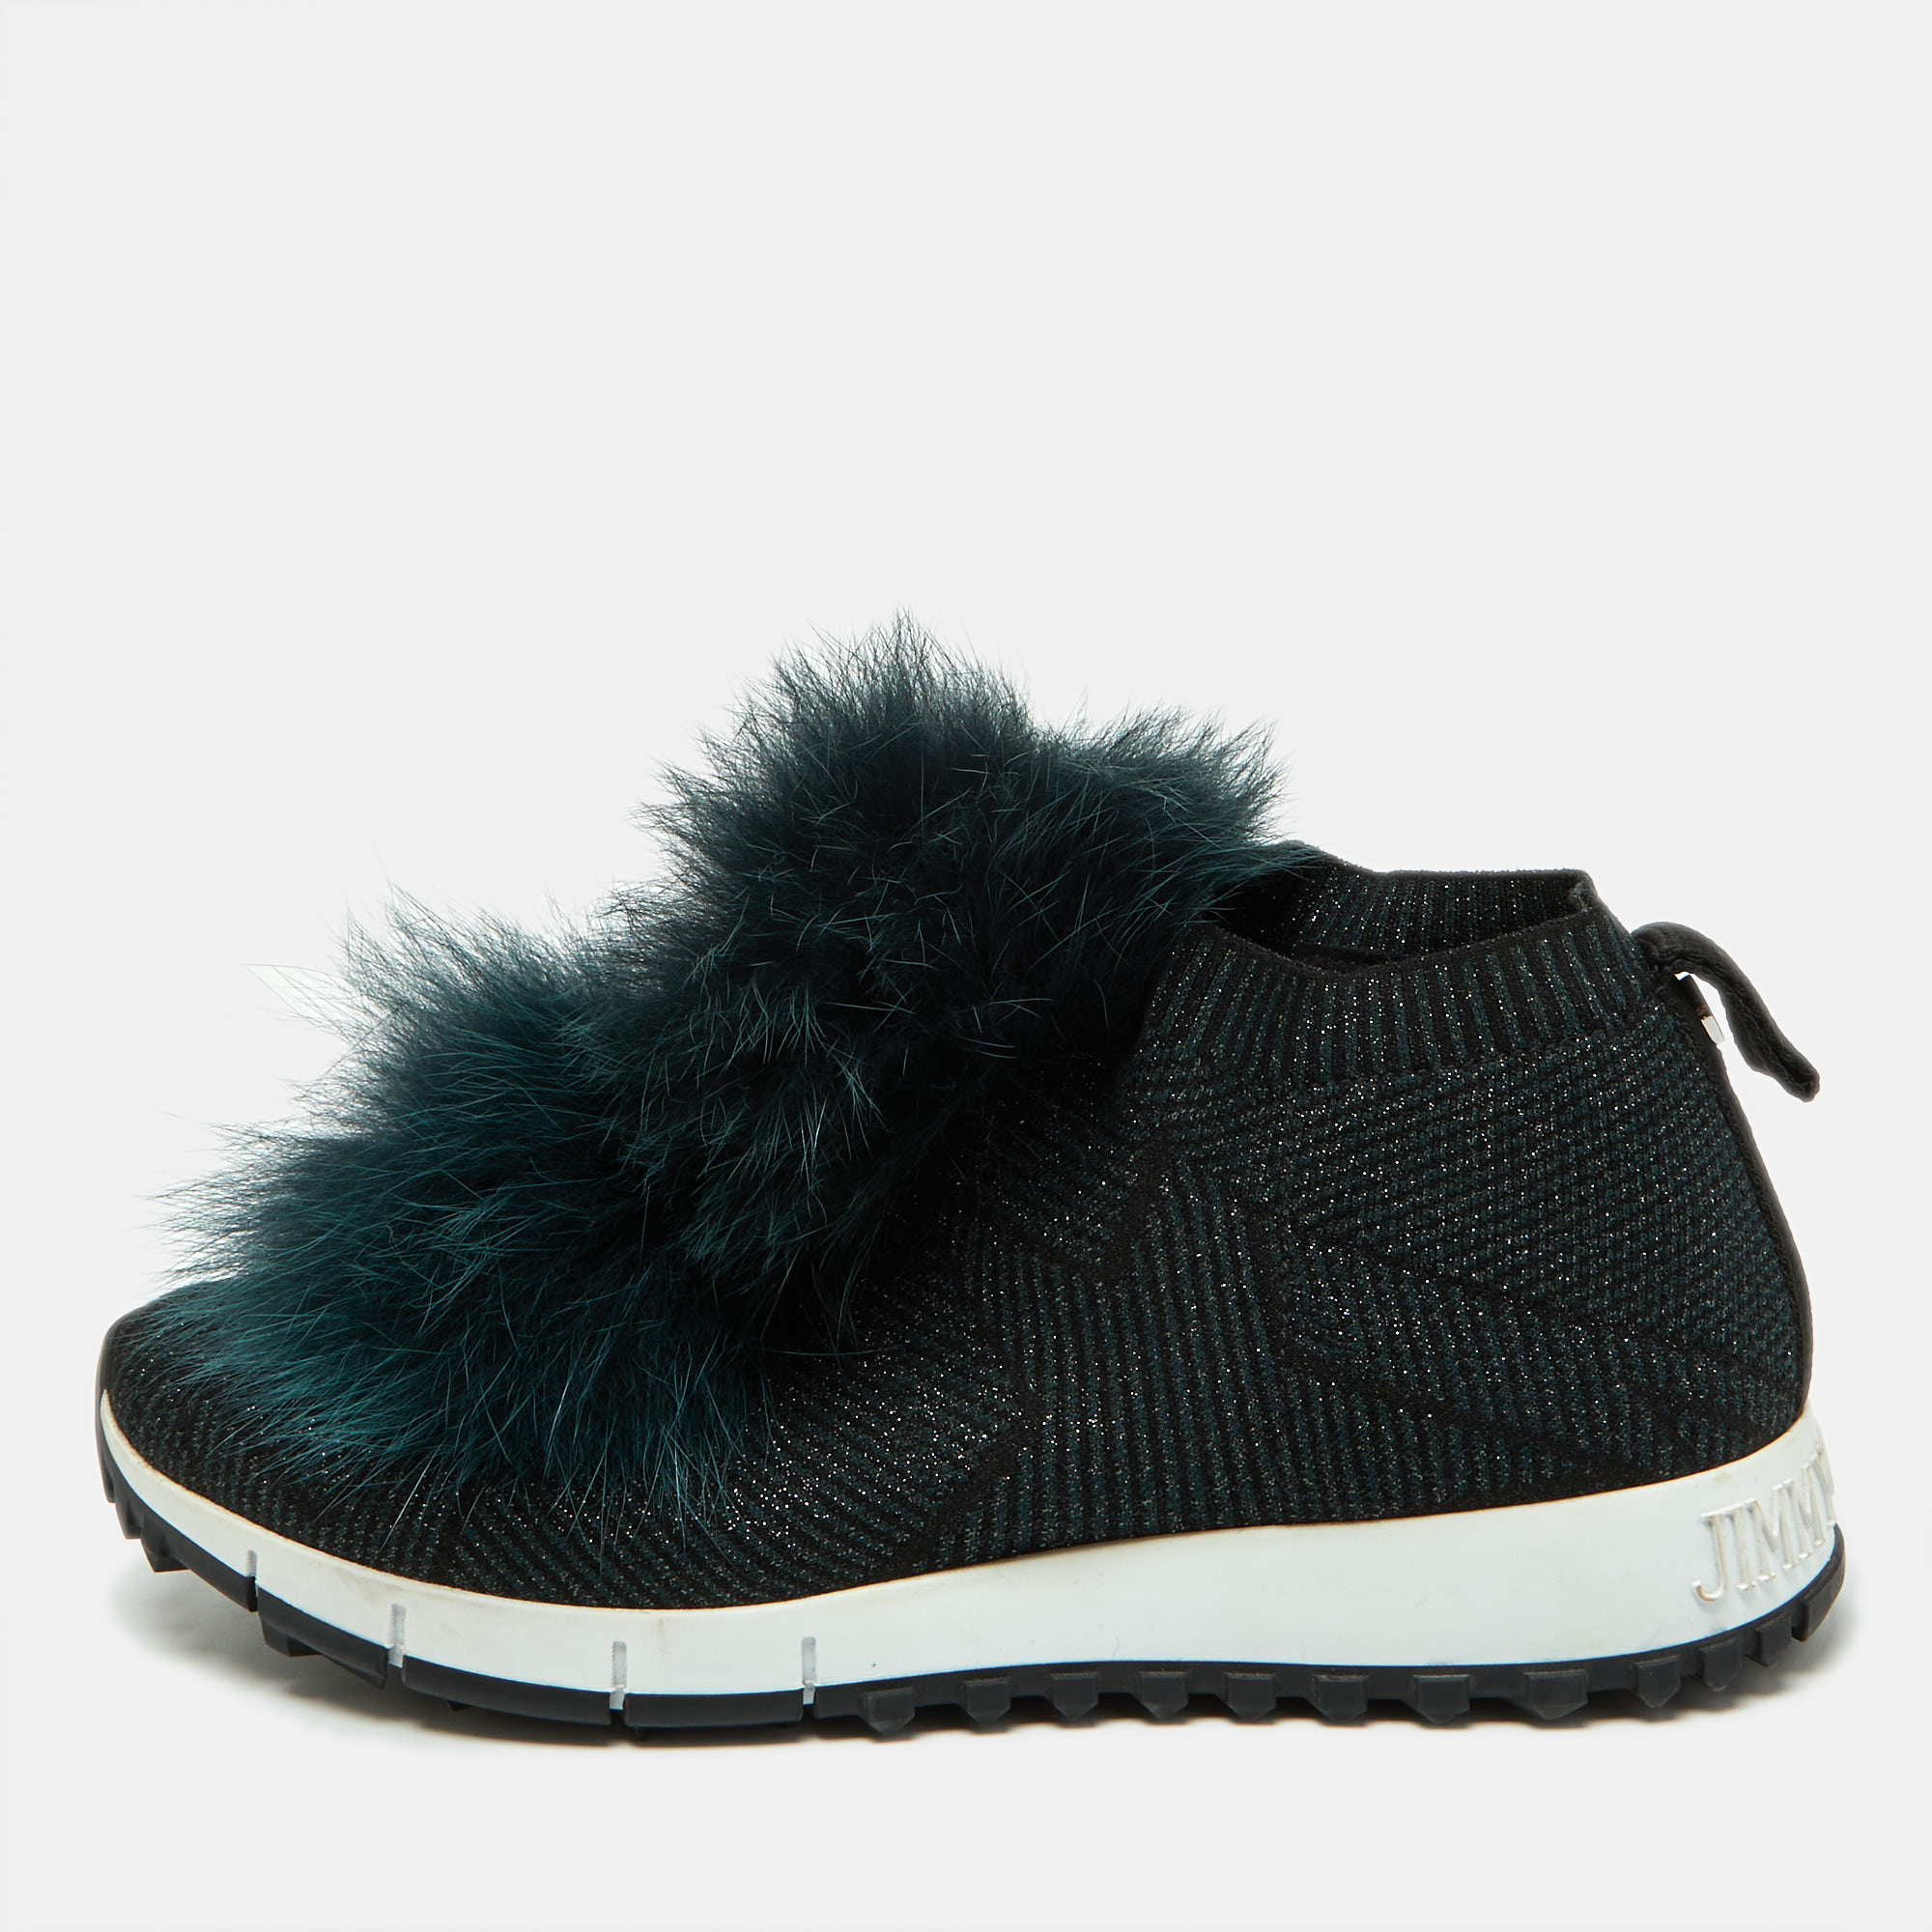 Here is Jimmy Choos fun take on sneakers Crafted in knit fabric the low top sneakers have a slip on style and statement fur pom pom details on the uppers. Try them on with dresses as well as jeans for a unique twist.